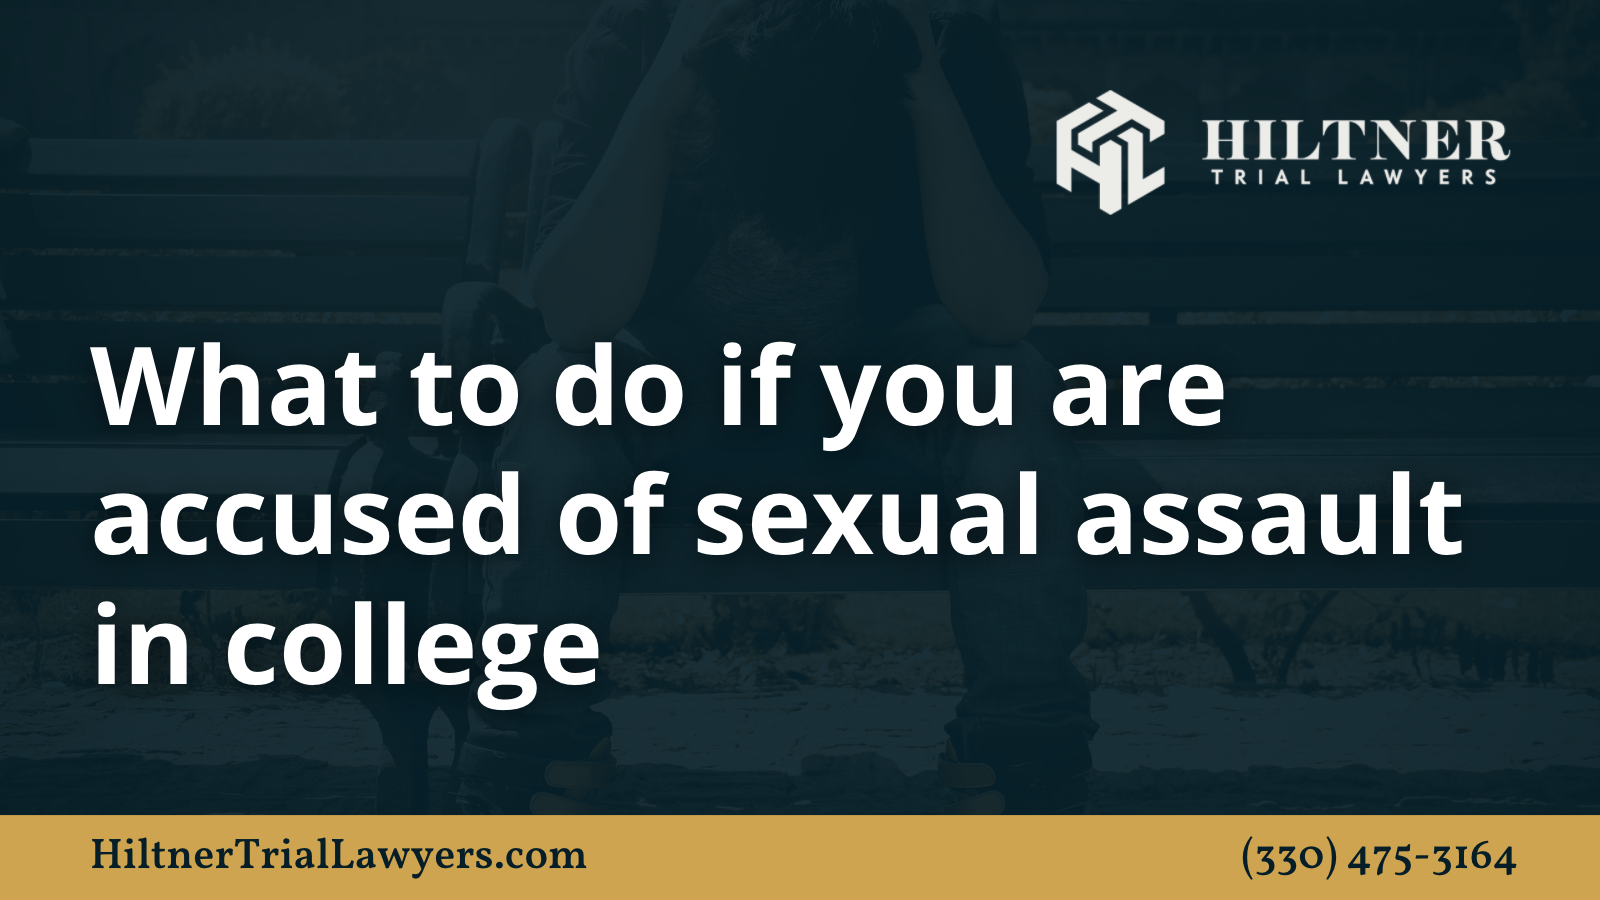 What to do if you are accused of sexual assault in college - Hiltner Trial Lawyers Ohio - max hiltner